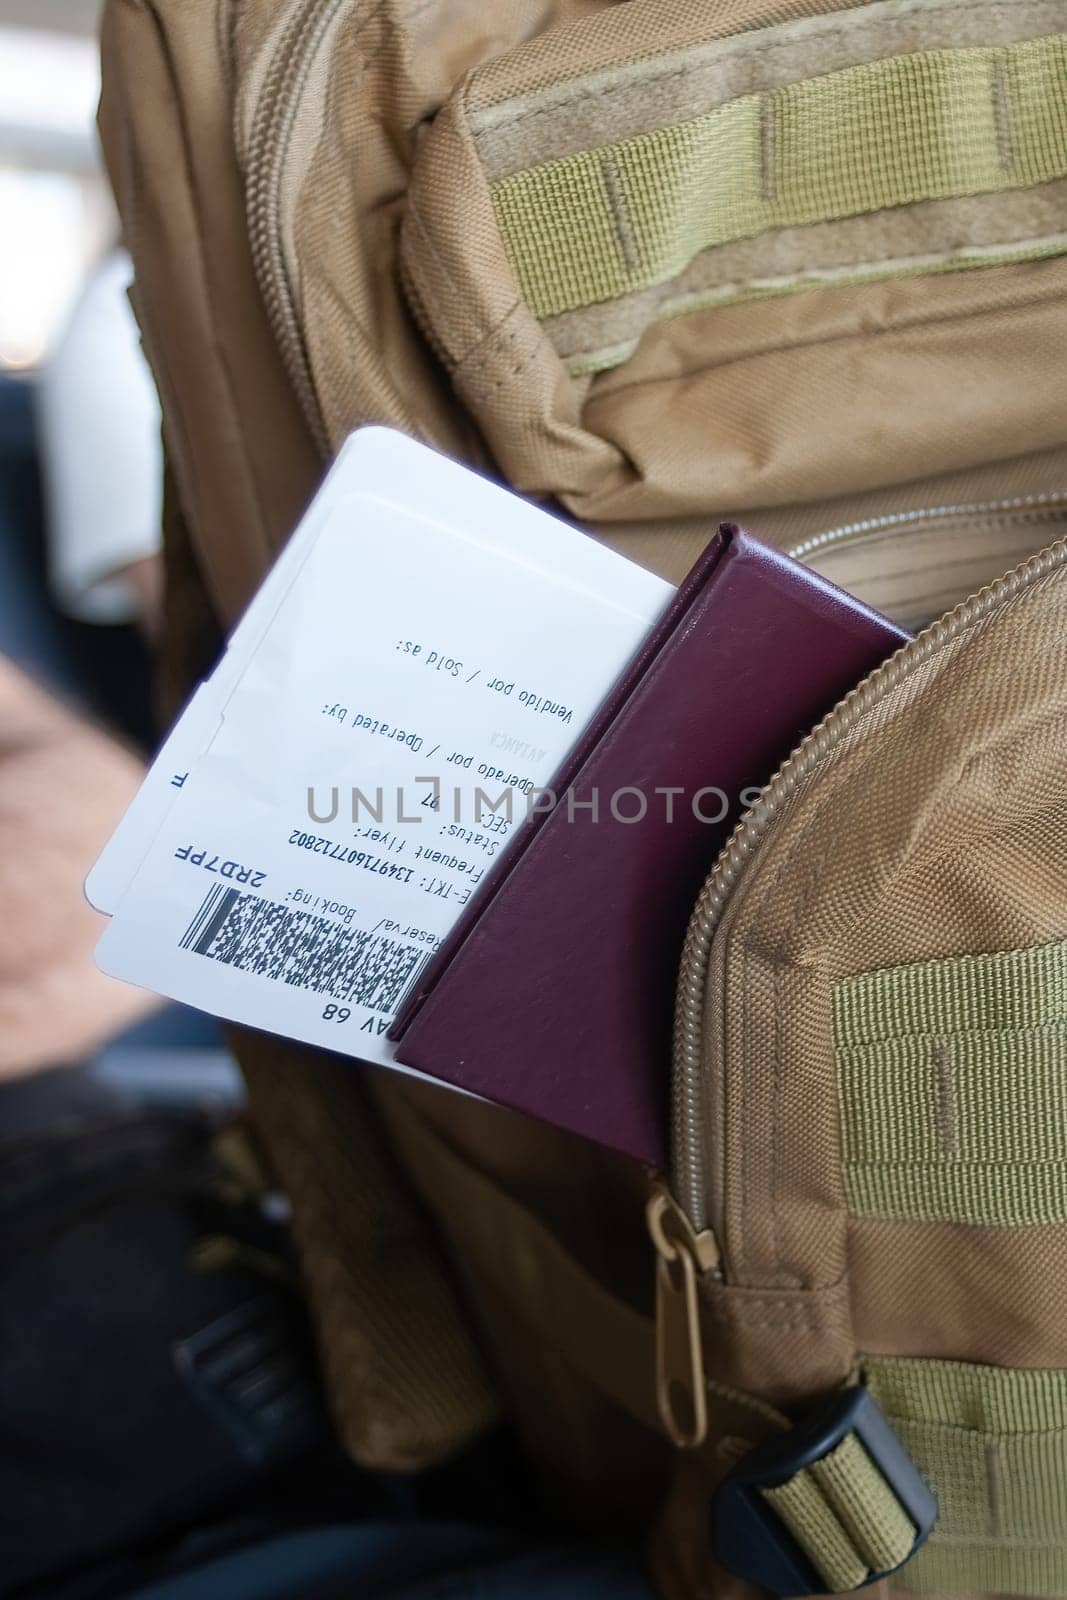 Backpack and travel documents of a passenger on an international flight.